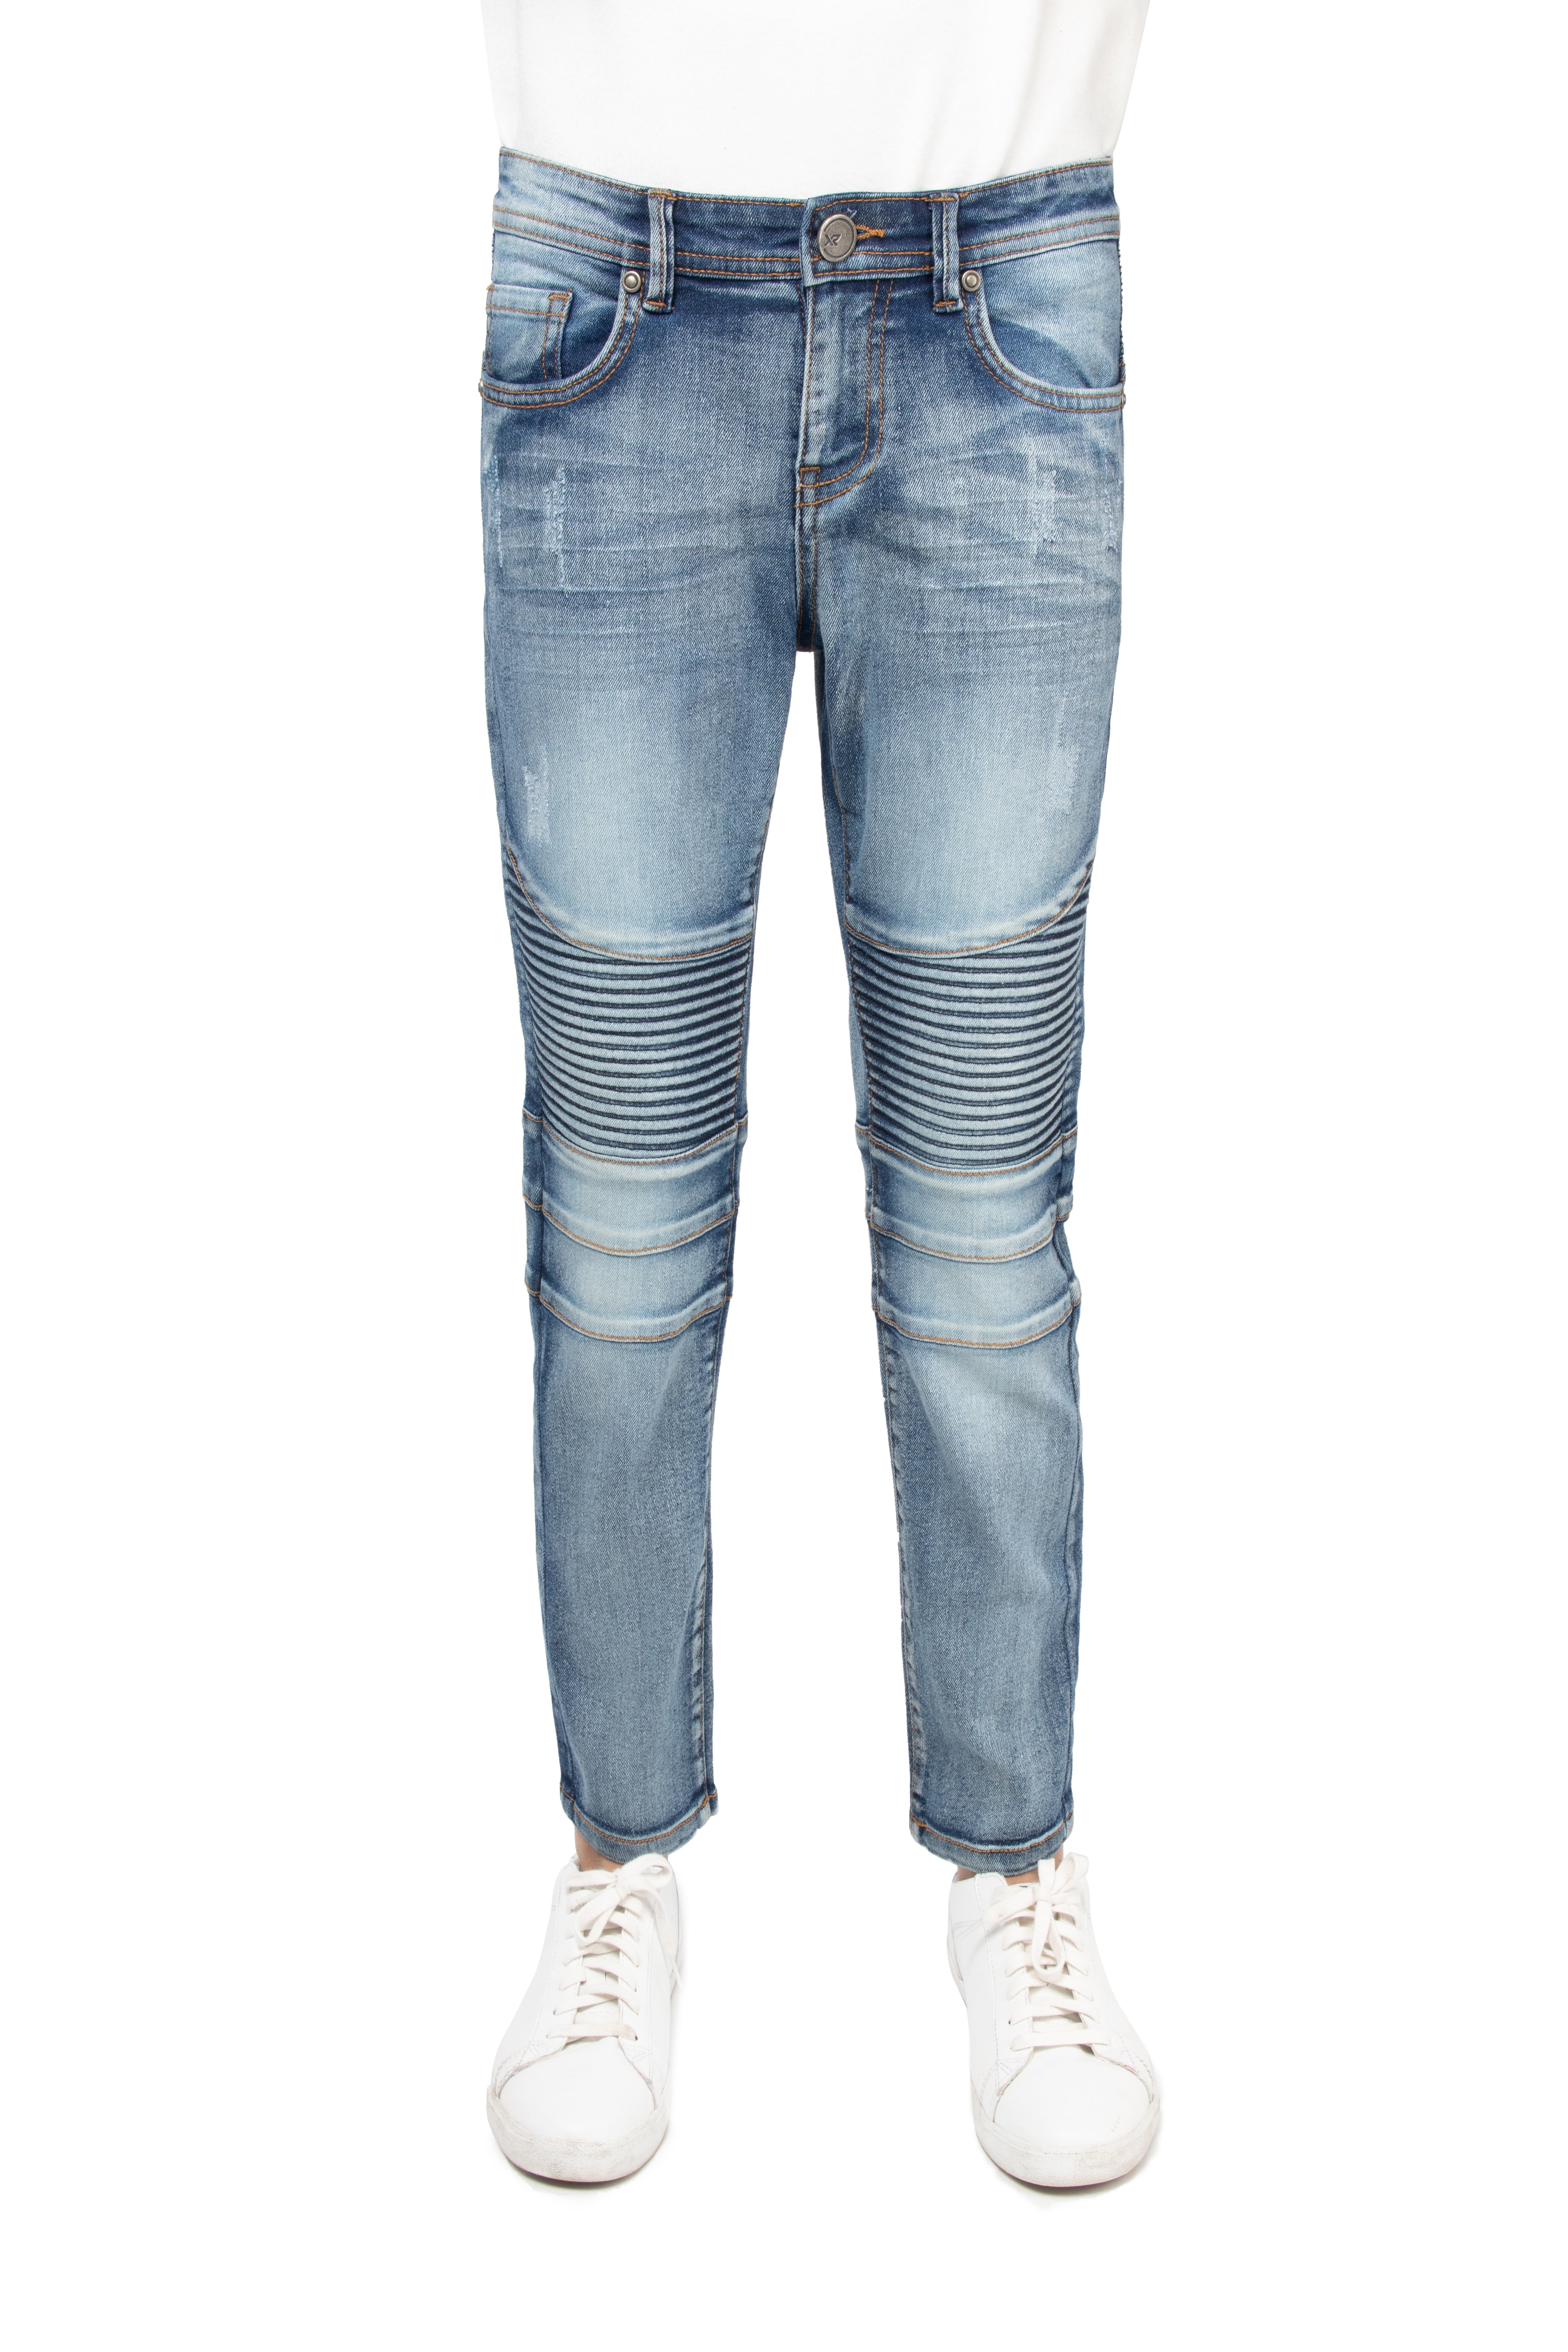 Denim boys jeans at Rs 360/piece in Ahmedabad | ID: 2850424267391